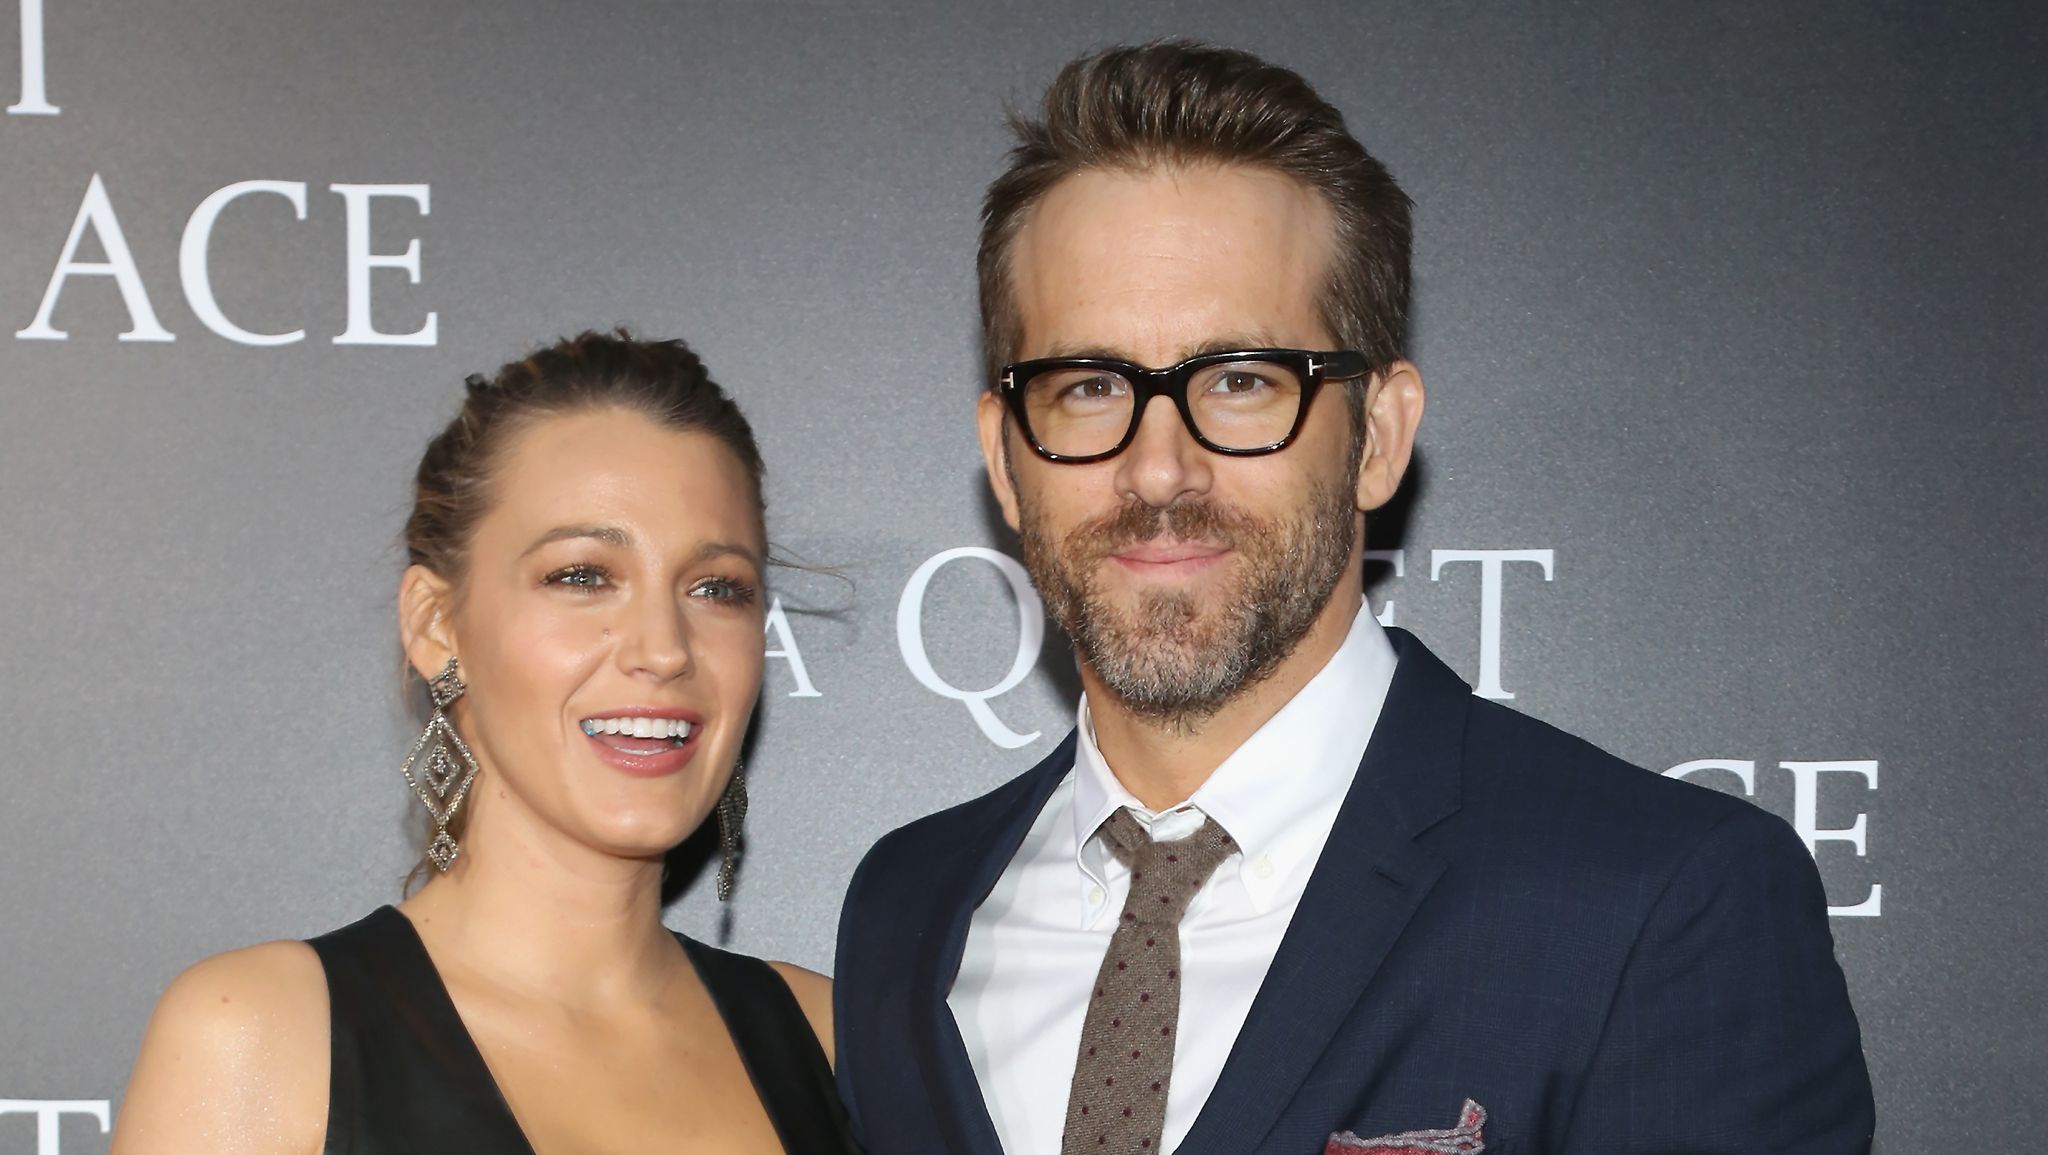 Blake Lively is trolling Ryan Reynolds again and it's hilarious